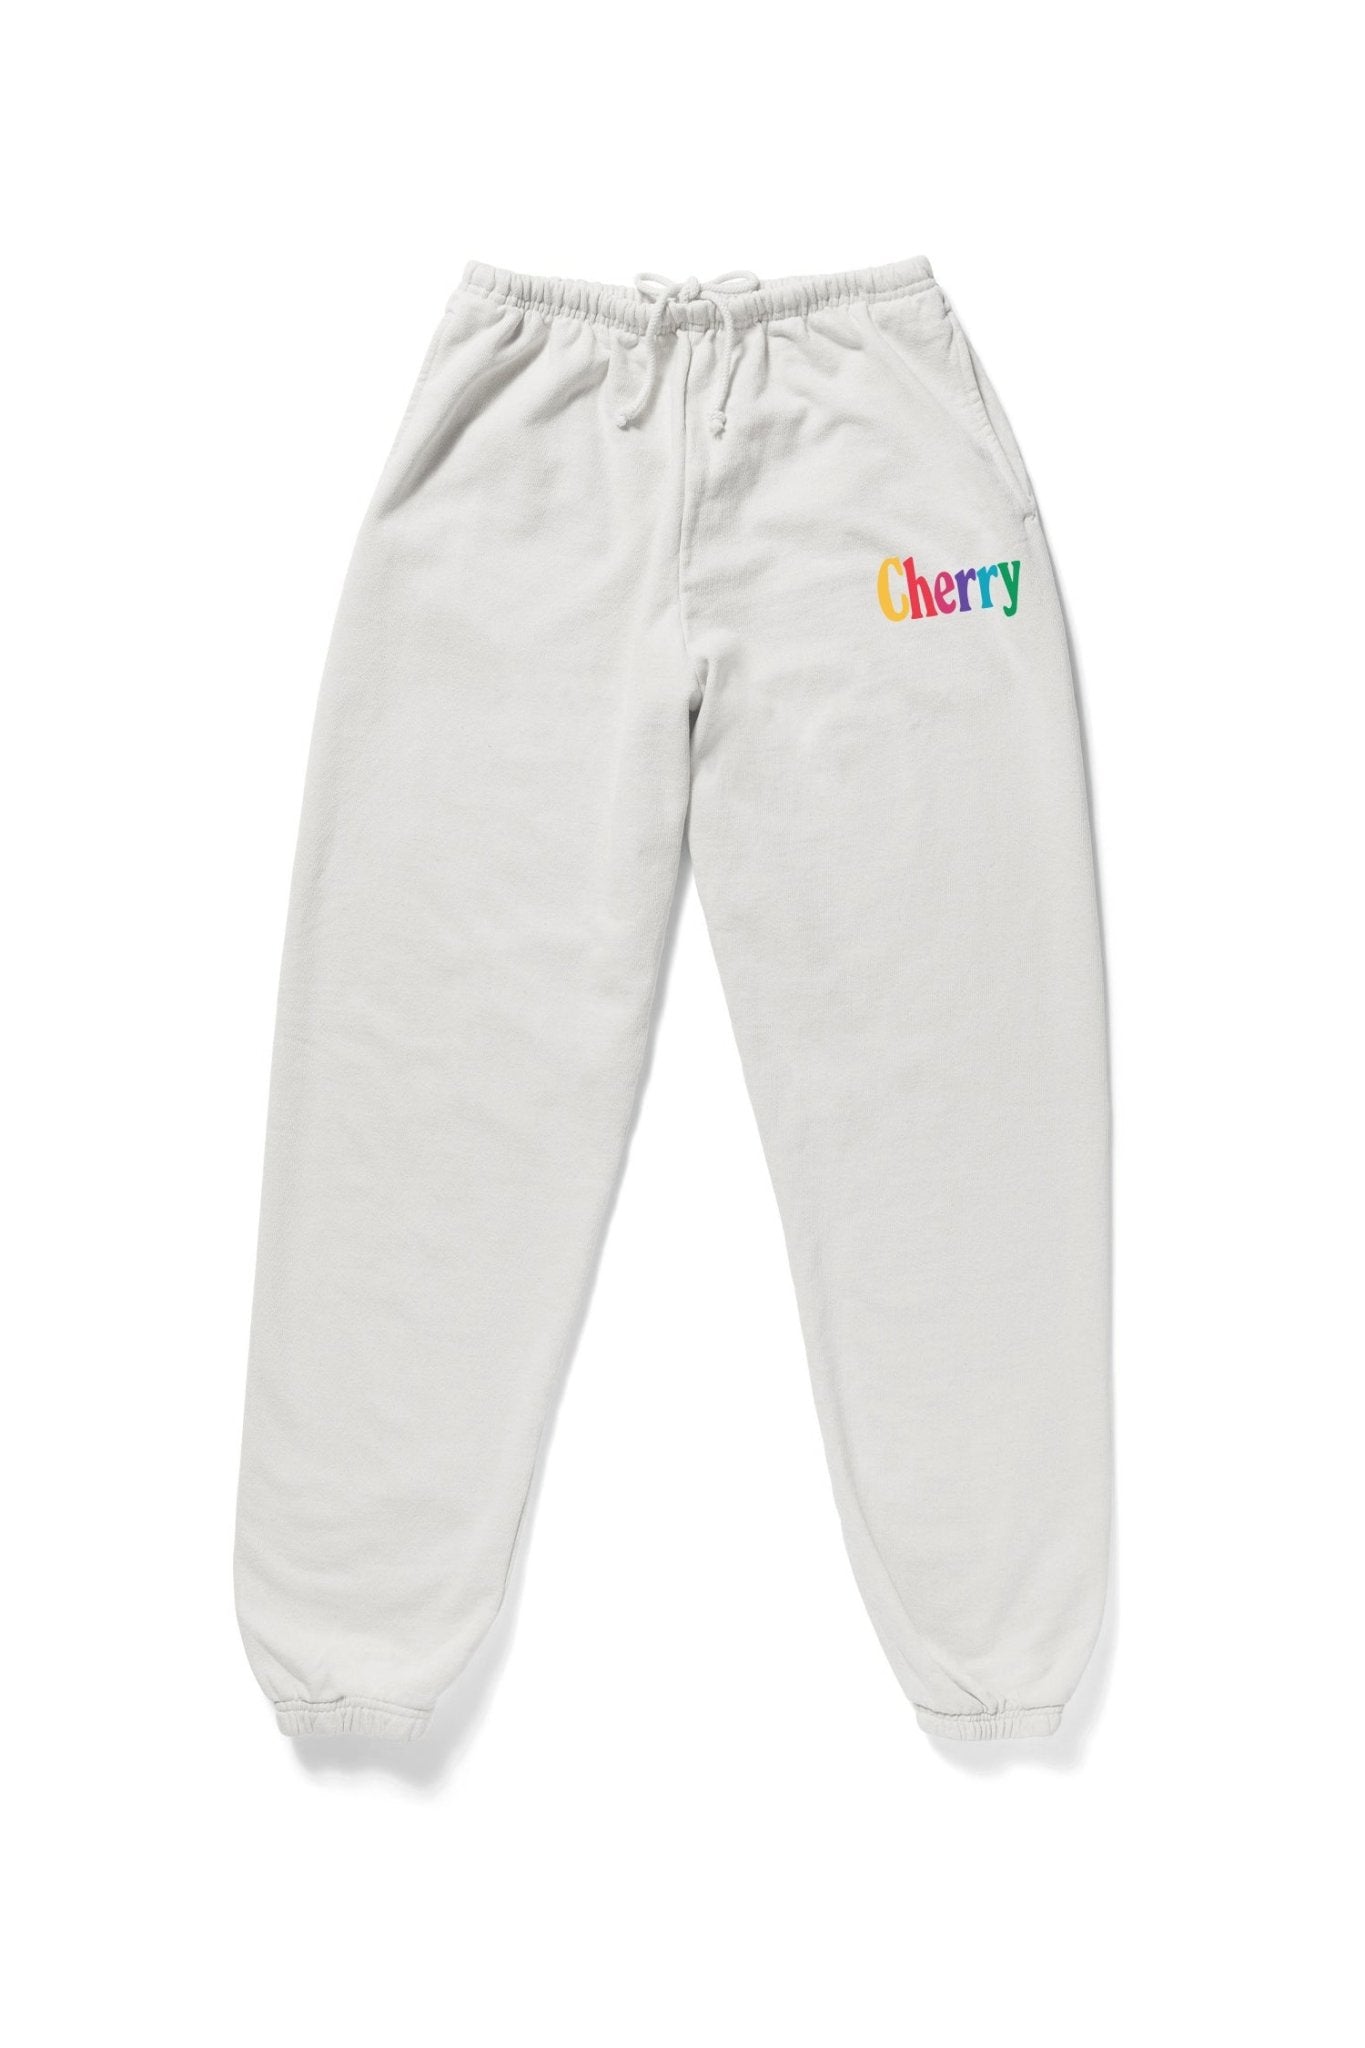 100% Recycled Cotton Track Pants - Cherry - Sweepstake Winners™